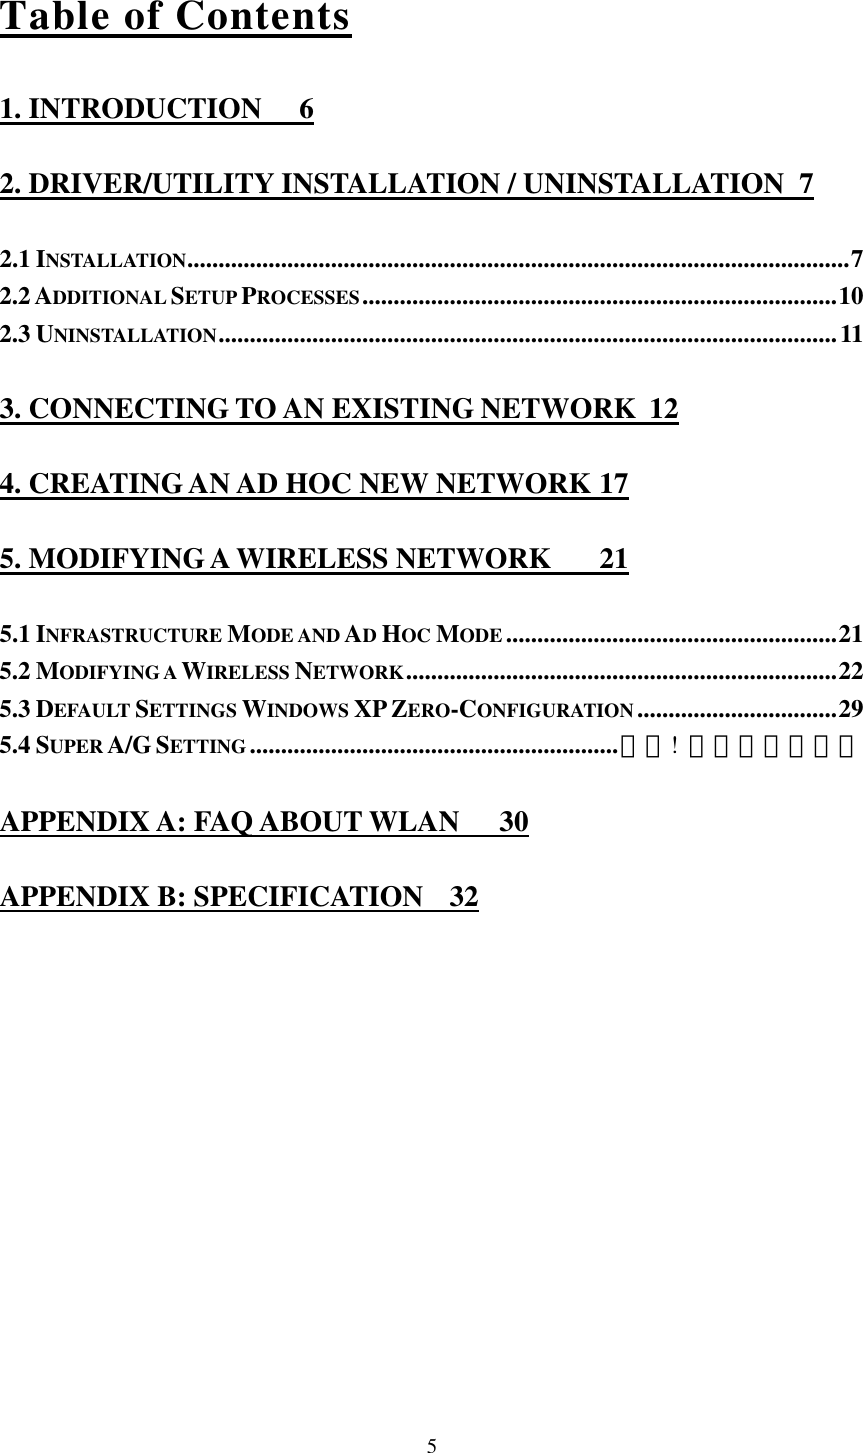  5Table of Contents 1. INTRODUCTION  6 2. DRIVER/UTILITY INSTALLATION / UNINSTALLATION  7 2.1 INSTALLATION..........................................................................................................7 2.2 ADDITIONAL SETUP PROCESSES............................................................................10 2.3 UNINSTALLATION...................................................................................................11 3. CONNECTING TO AN EXISTING NETWORK  12 4. CREATING AN AD HOC NEW NETWORK 17 5. MODIFYING A WIRELESS NETWORK  21 5.1 INFRASTRUCTURE MODE AND AD HOC MODE .....................................................21 5.2 MODIFYING A WIRELESS NETWORK.....................................................................22 5.3 DEFAULT SETTINGS WINDOWS XP ZERO-CONFIGURATION ................................29 5.4 SUPER A/G SETTING...........................................................錯誤! 尚未定義書籤。 APPENDIX A: FAQ ABOUT WLAN  30 APPENDIX B: SPECIFICATION  32 